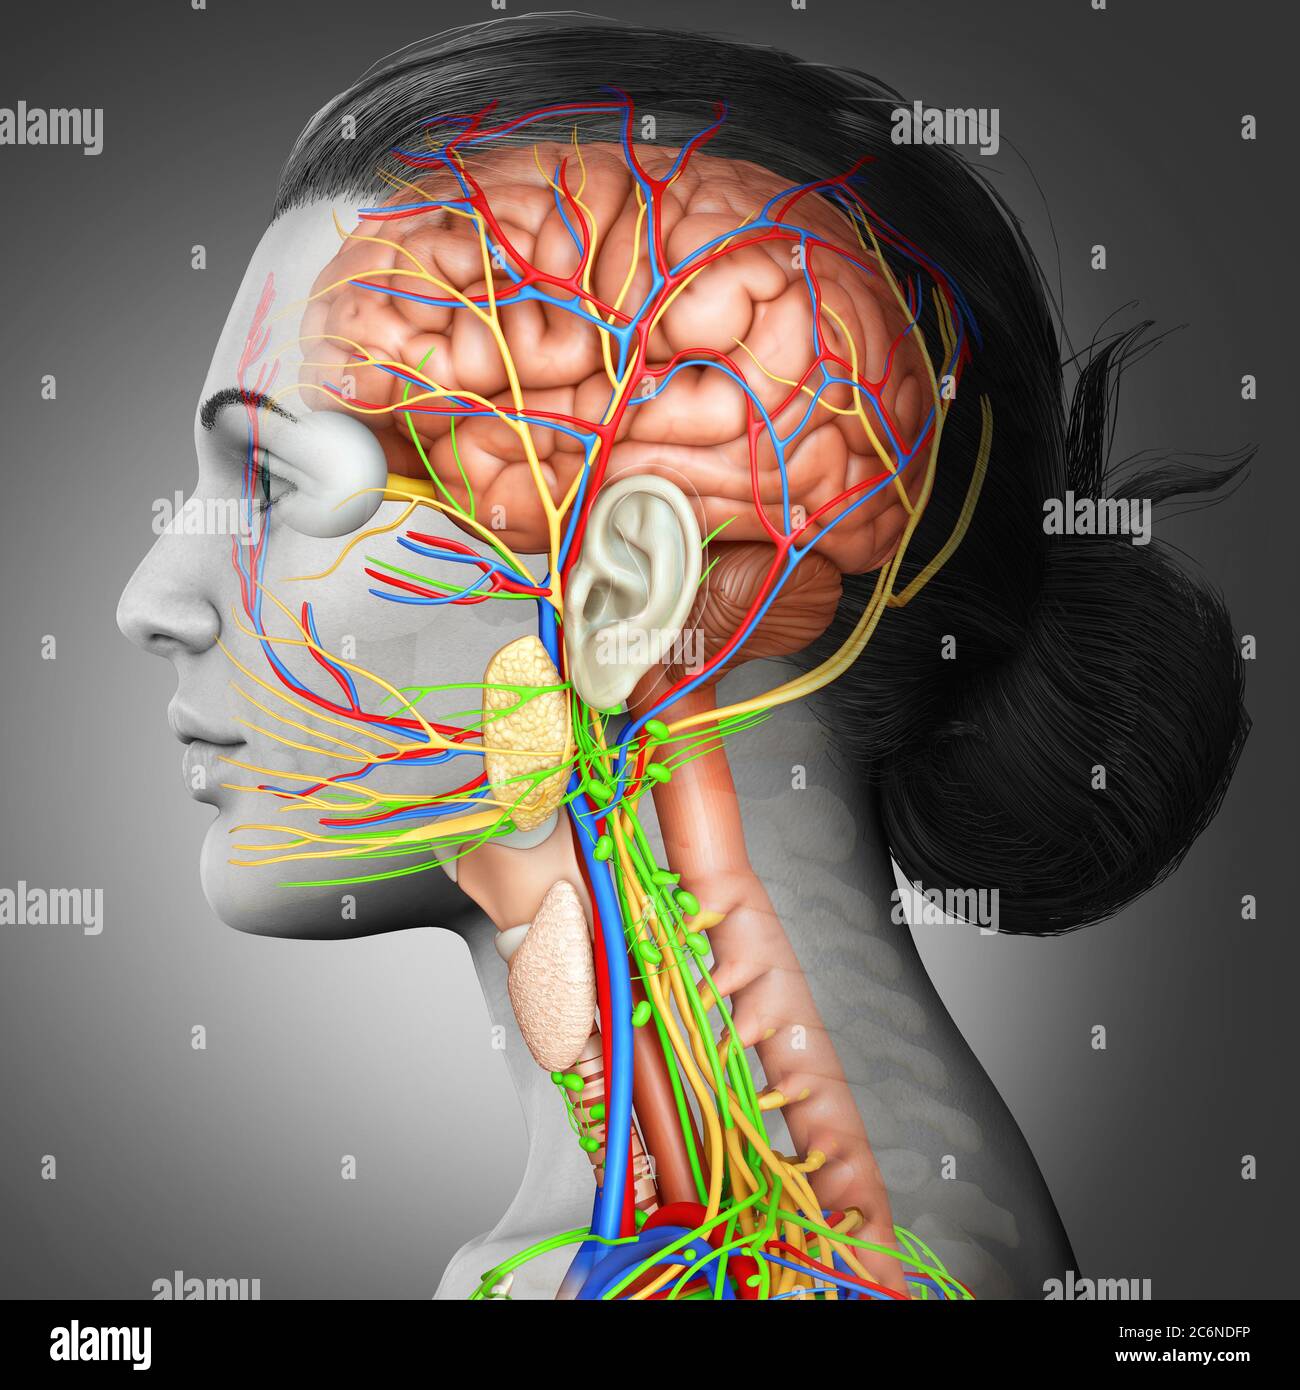 3d rendered medically accurate illustration of a female brain anatomy Stock Photo